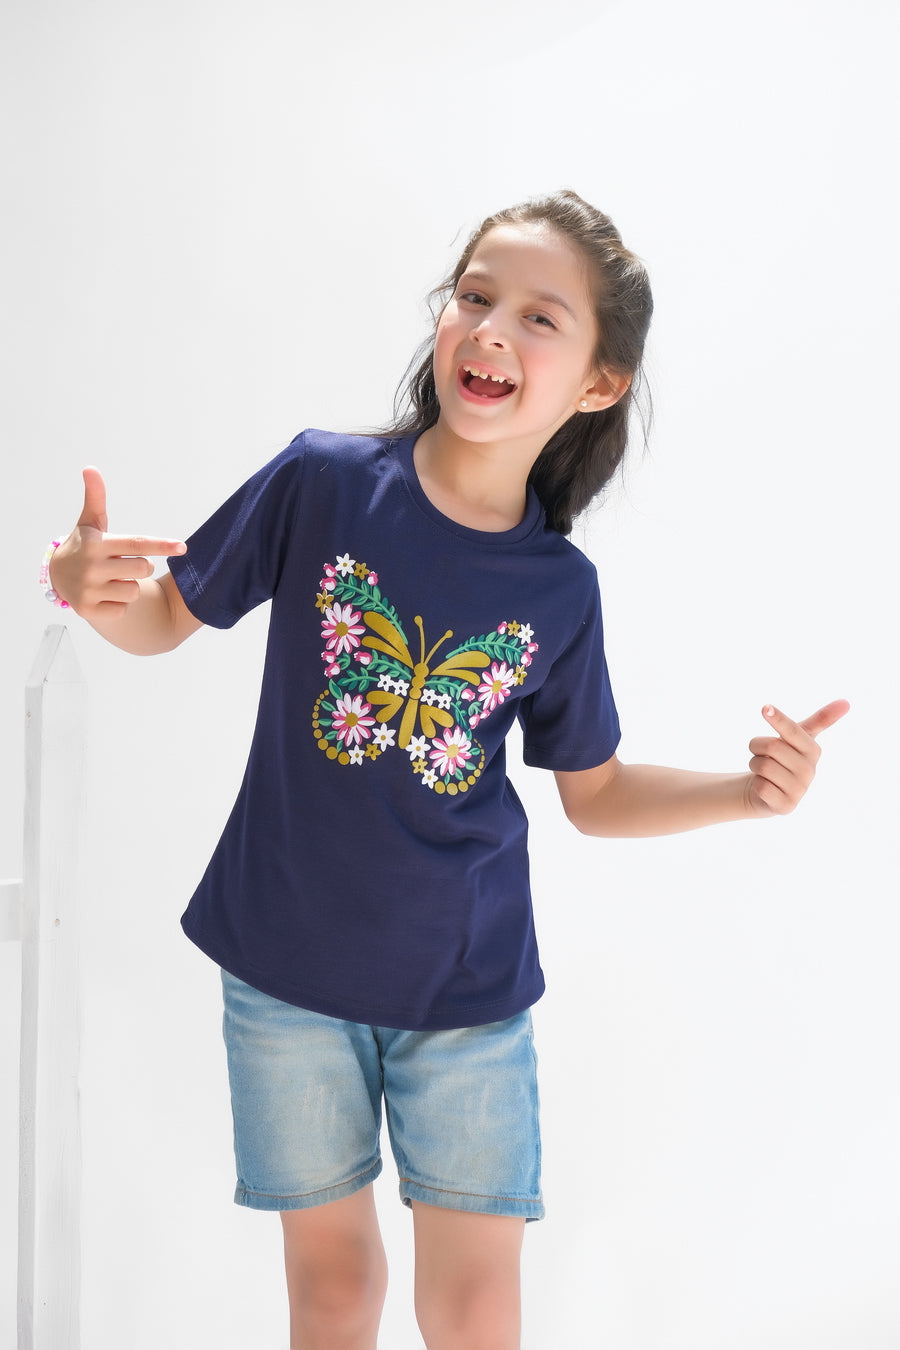 Flowers Pattern Butterfly Half Sleeves T-shirts for Kids - Navy Blue